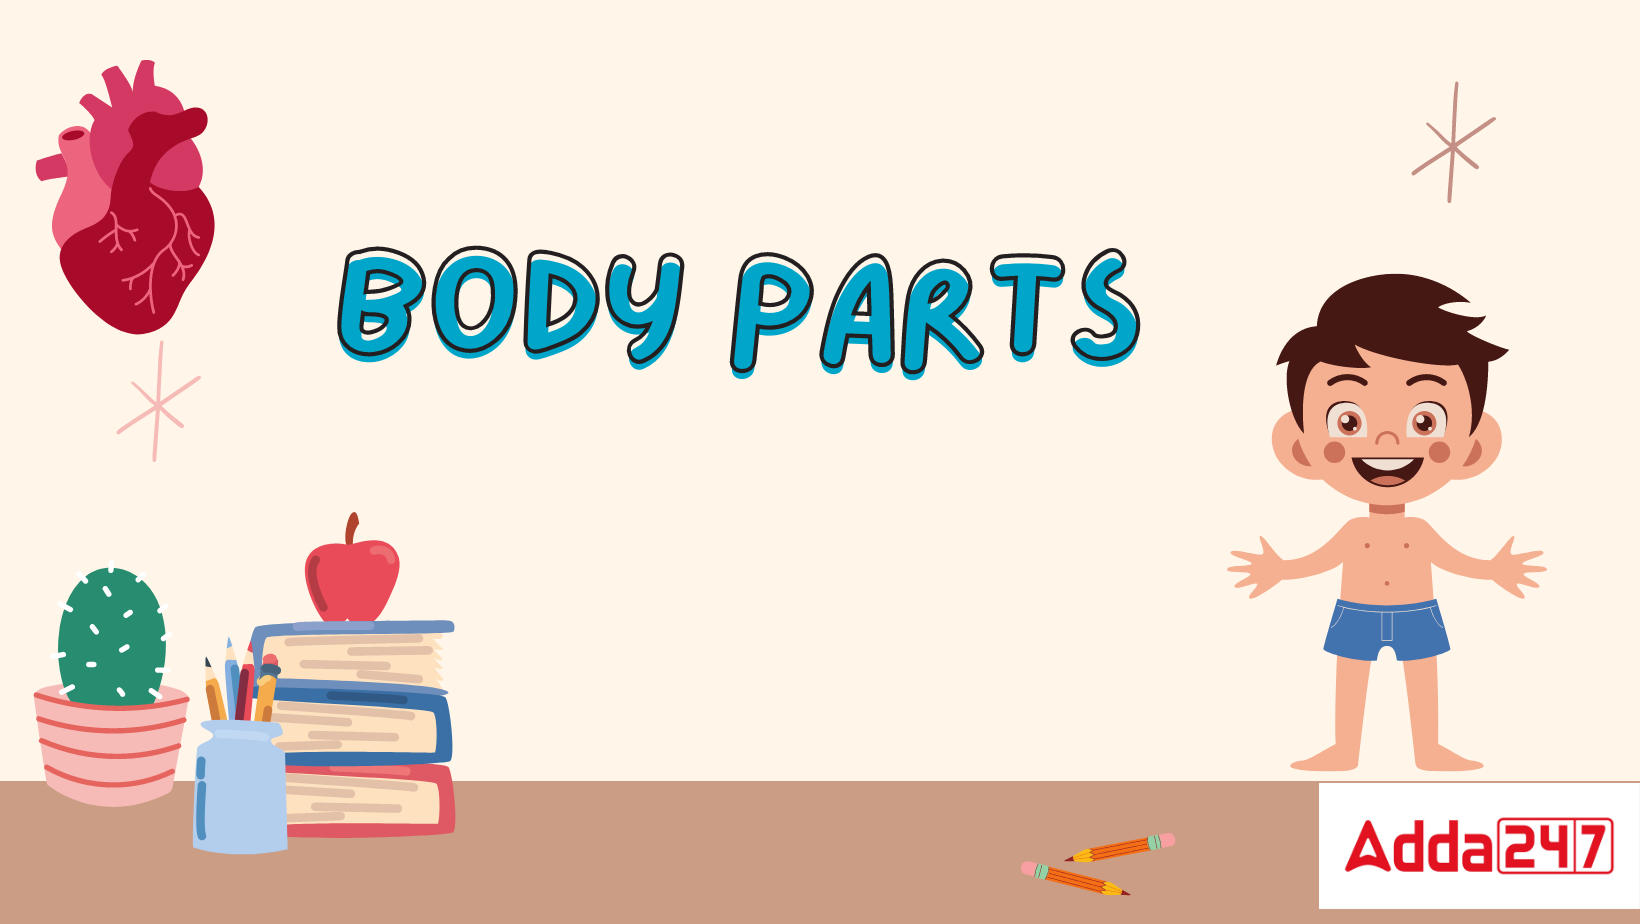 Body Parts Name in English with Pictures  Human body parts, Body parts,  Human body